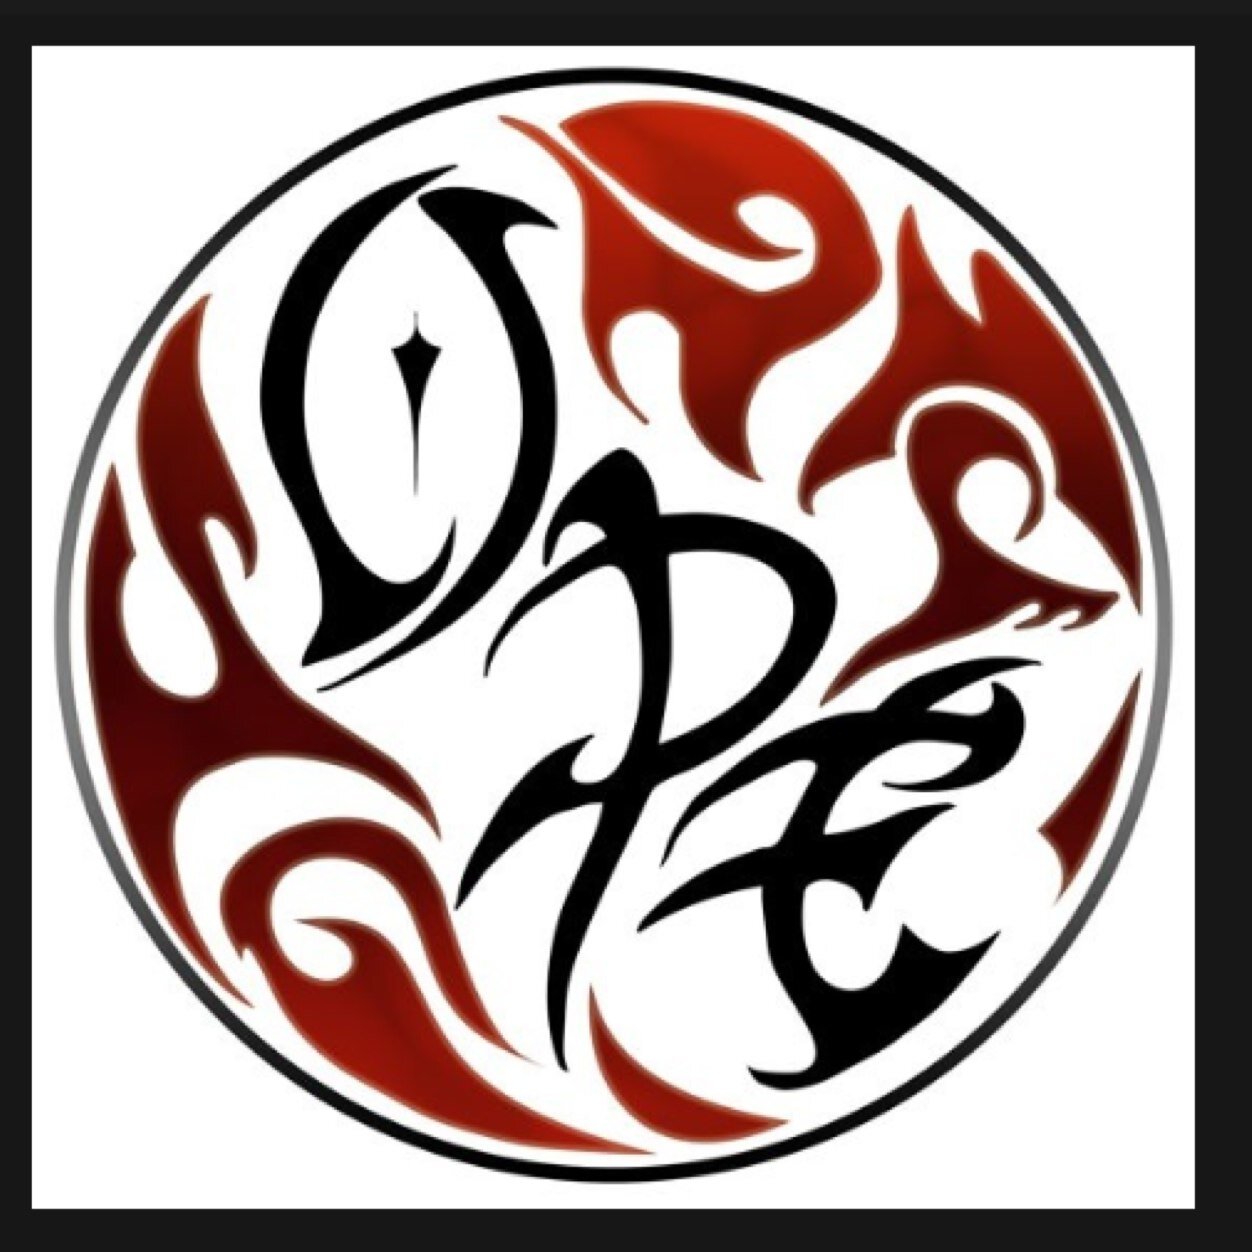 OPE is a BDSM community organization and privately owned dungeon providing a forum for the many expressions of PE relationships 
OPE_OKC@fetlife visit us!!